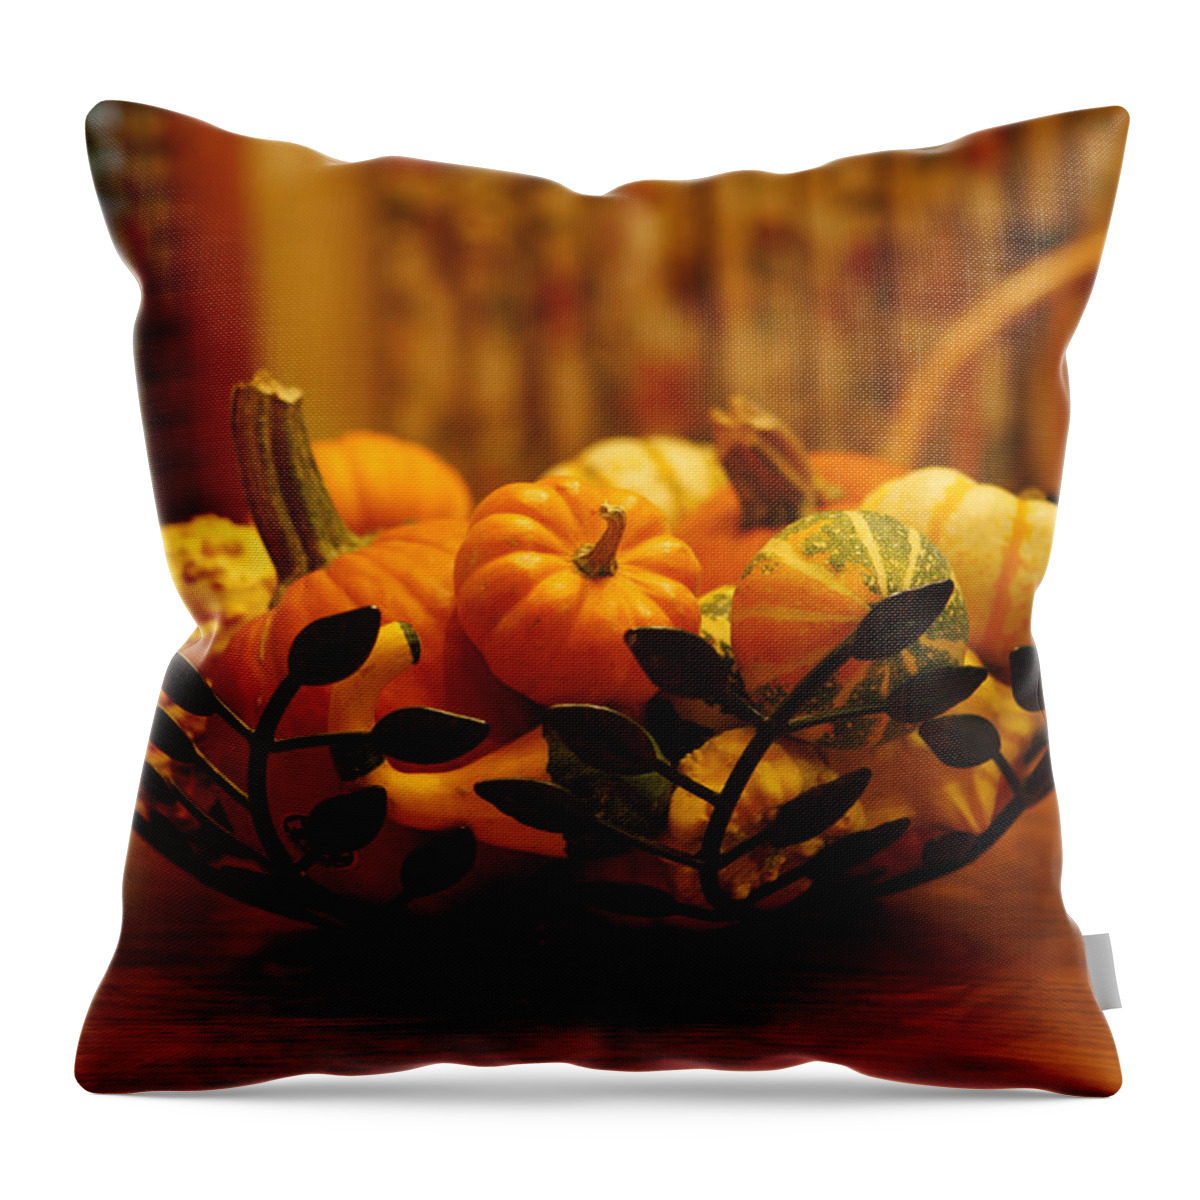 Autumn Throw Pillow featuring the photograph Autumn Glow by Marilyn Hunt